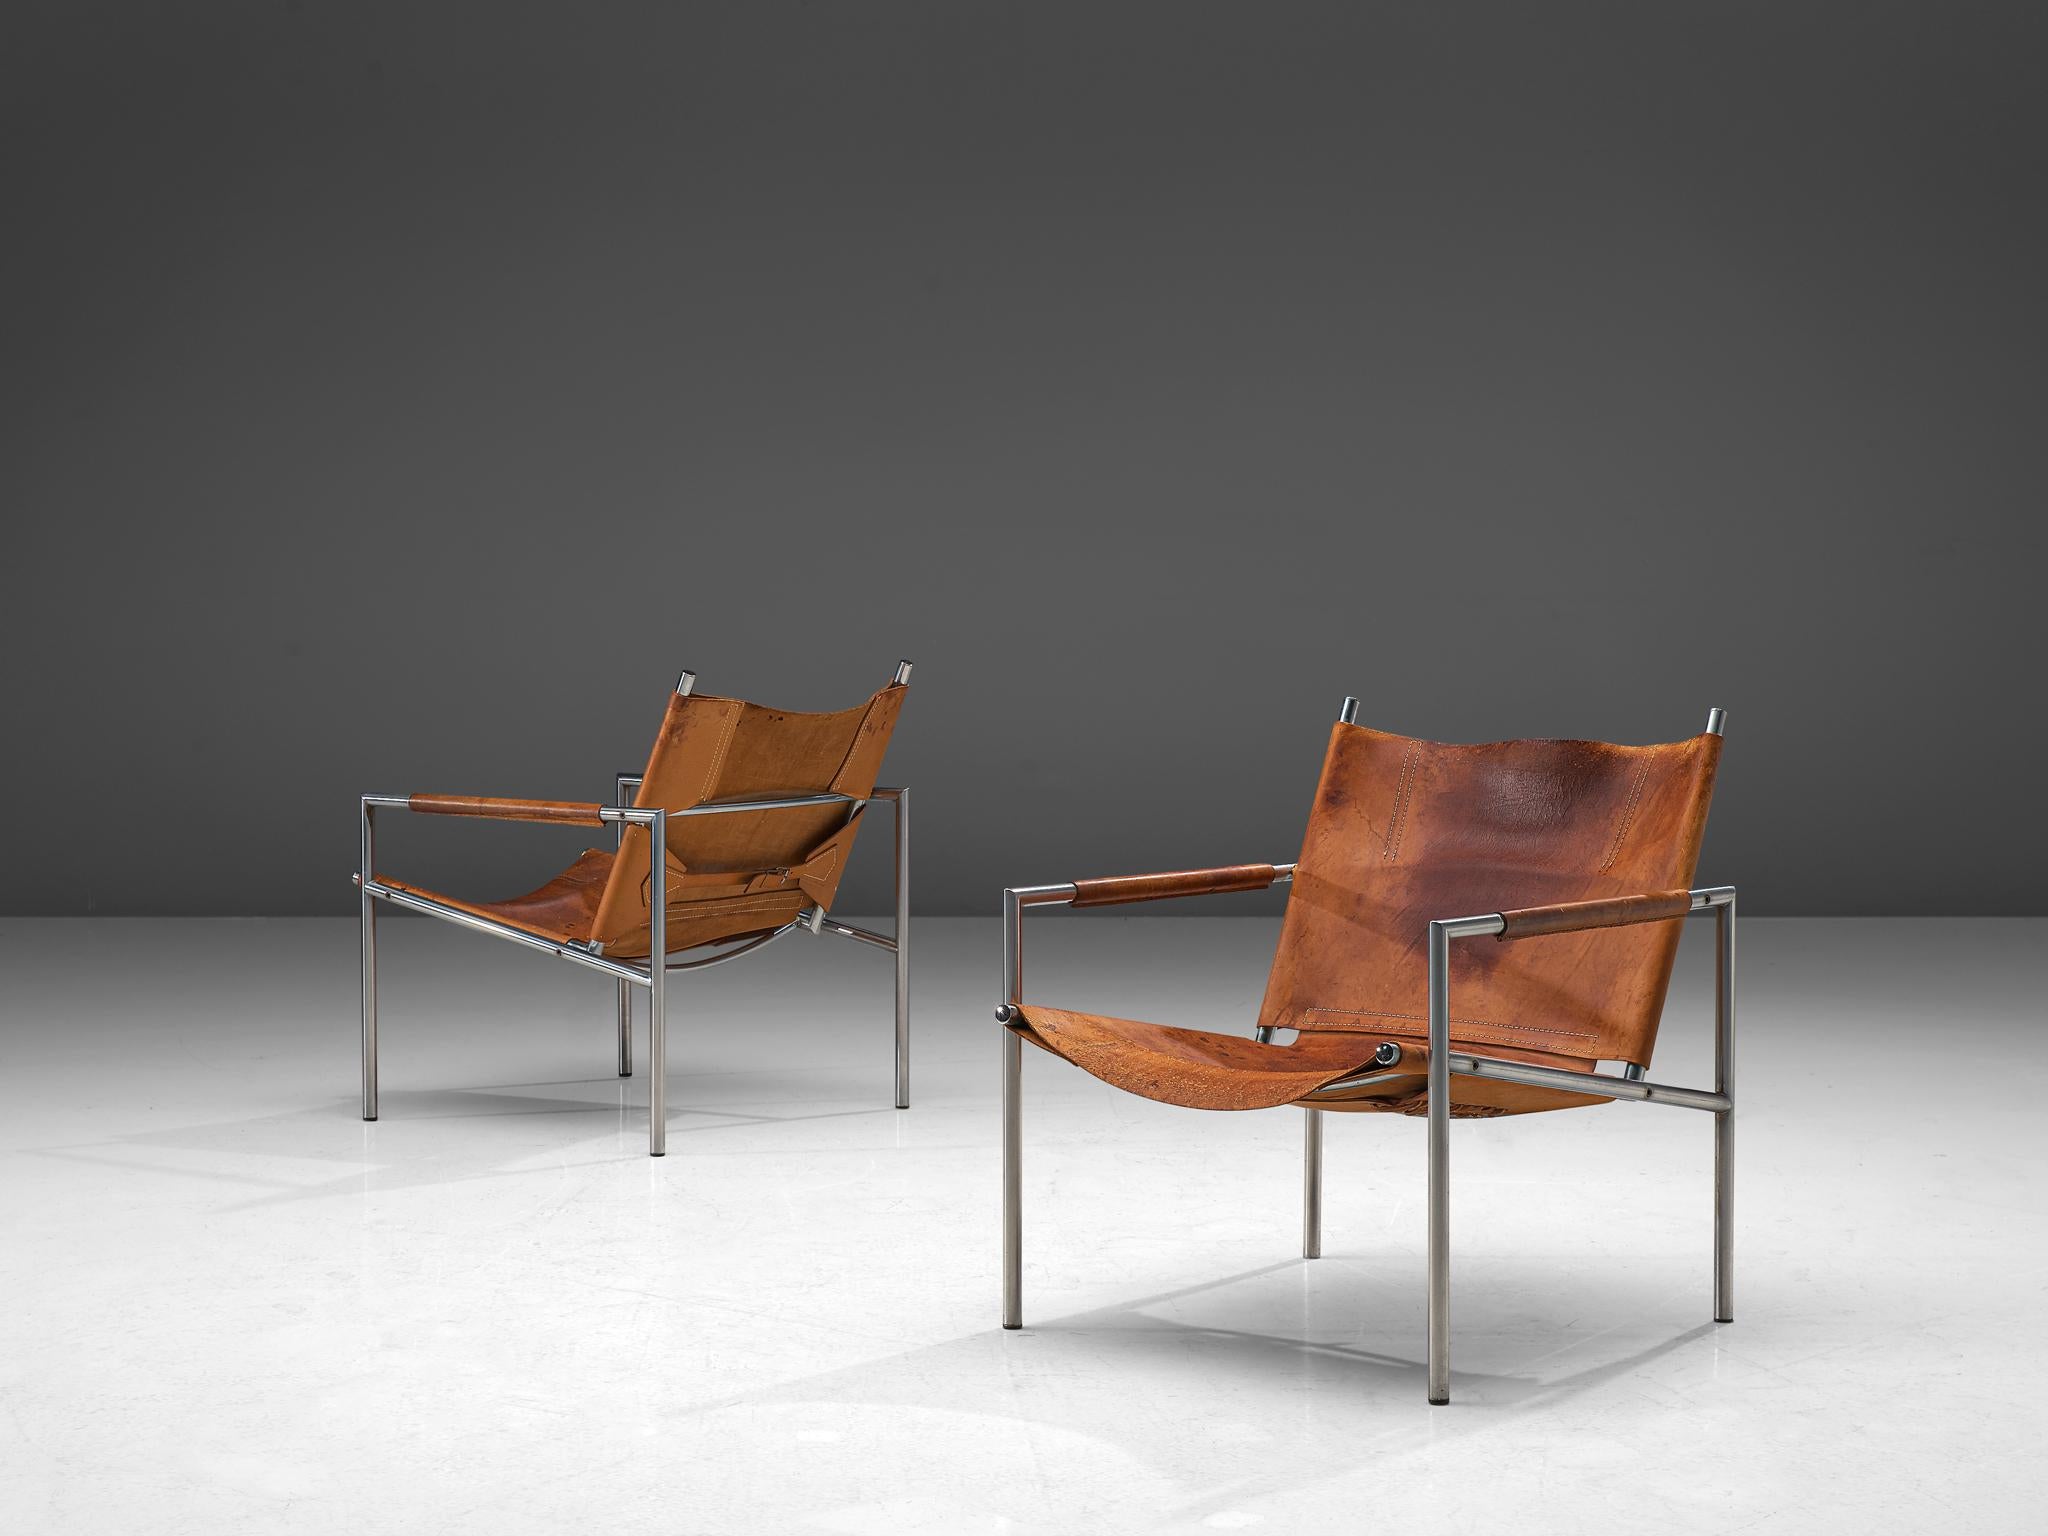 Martin Visser, pair of armchairs, leather and metal, The Netherlands, 1965.

These modern, Minimalist easy chairs are made of a tubular brushed steel in combination with soft, patinated cognac leather upholstery. The armrests are covered in cognac